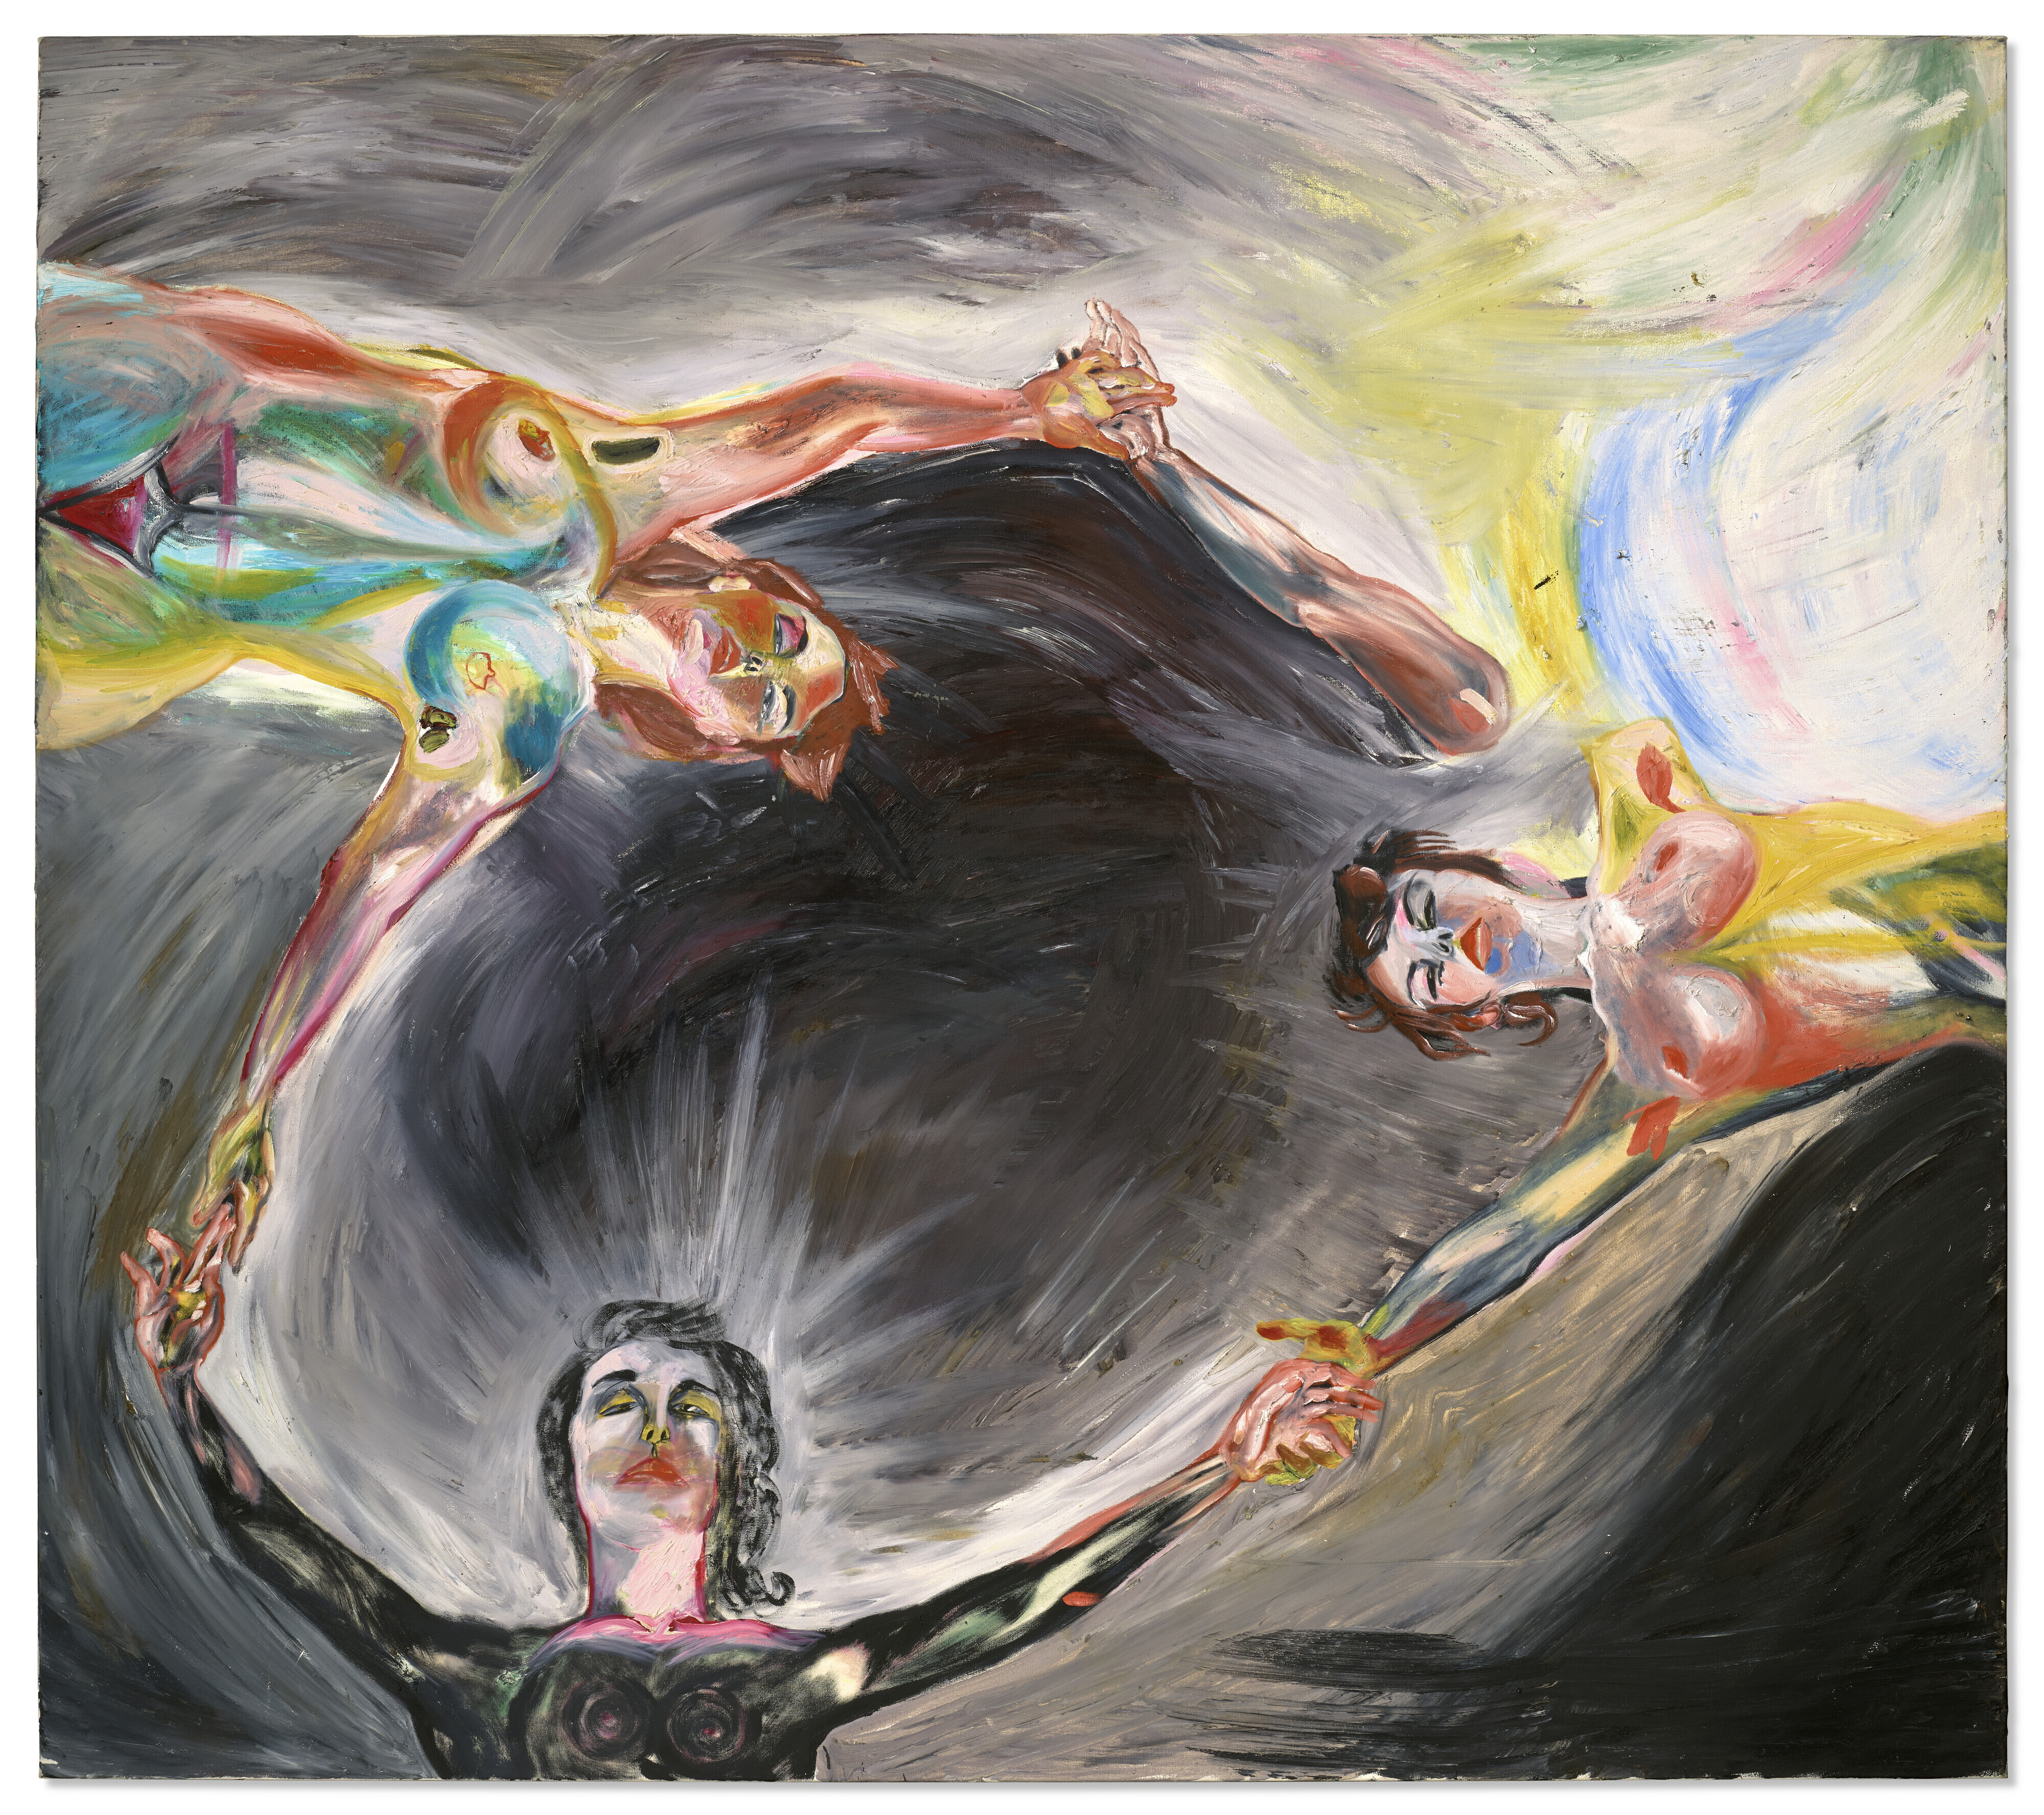 Francesco Clemente, ‘The Fourteen Stations, No. II,’ circa 1981-1982 oil and wax on linen, 78 by 88in (198 by 223.5cm), on view in Francesco Clemente: Works from the Collection of Thomas and Doris Ammann. Image courtesy of Christie’s Images Ltd. 2022